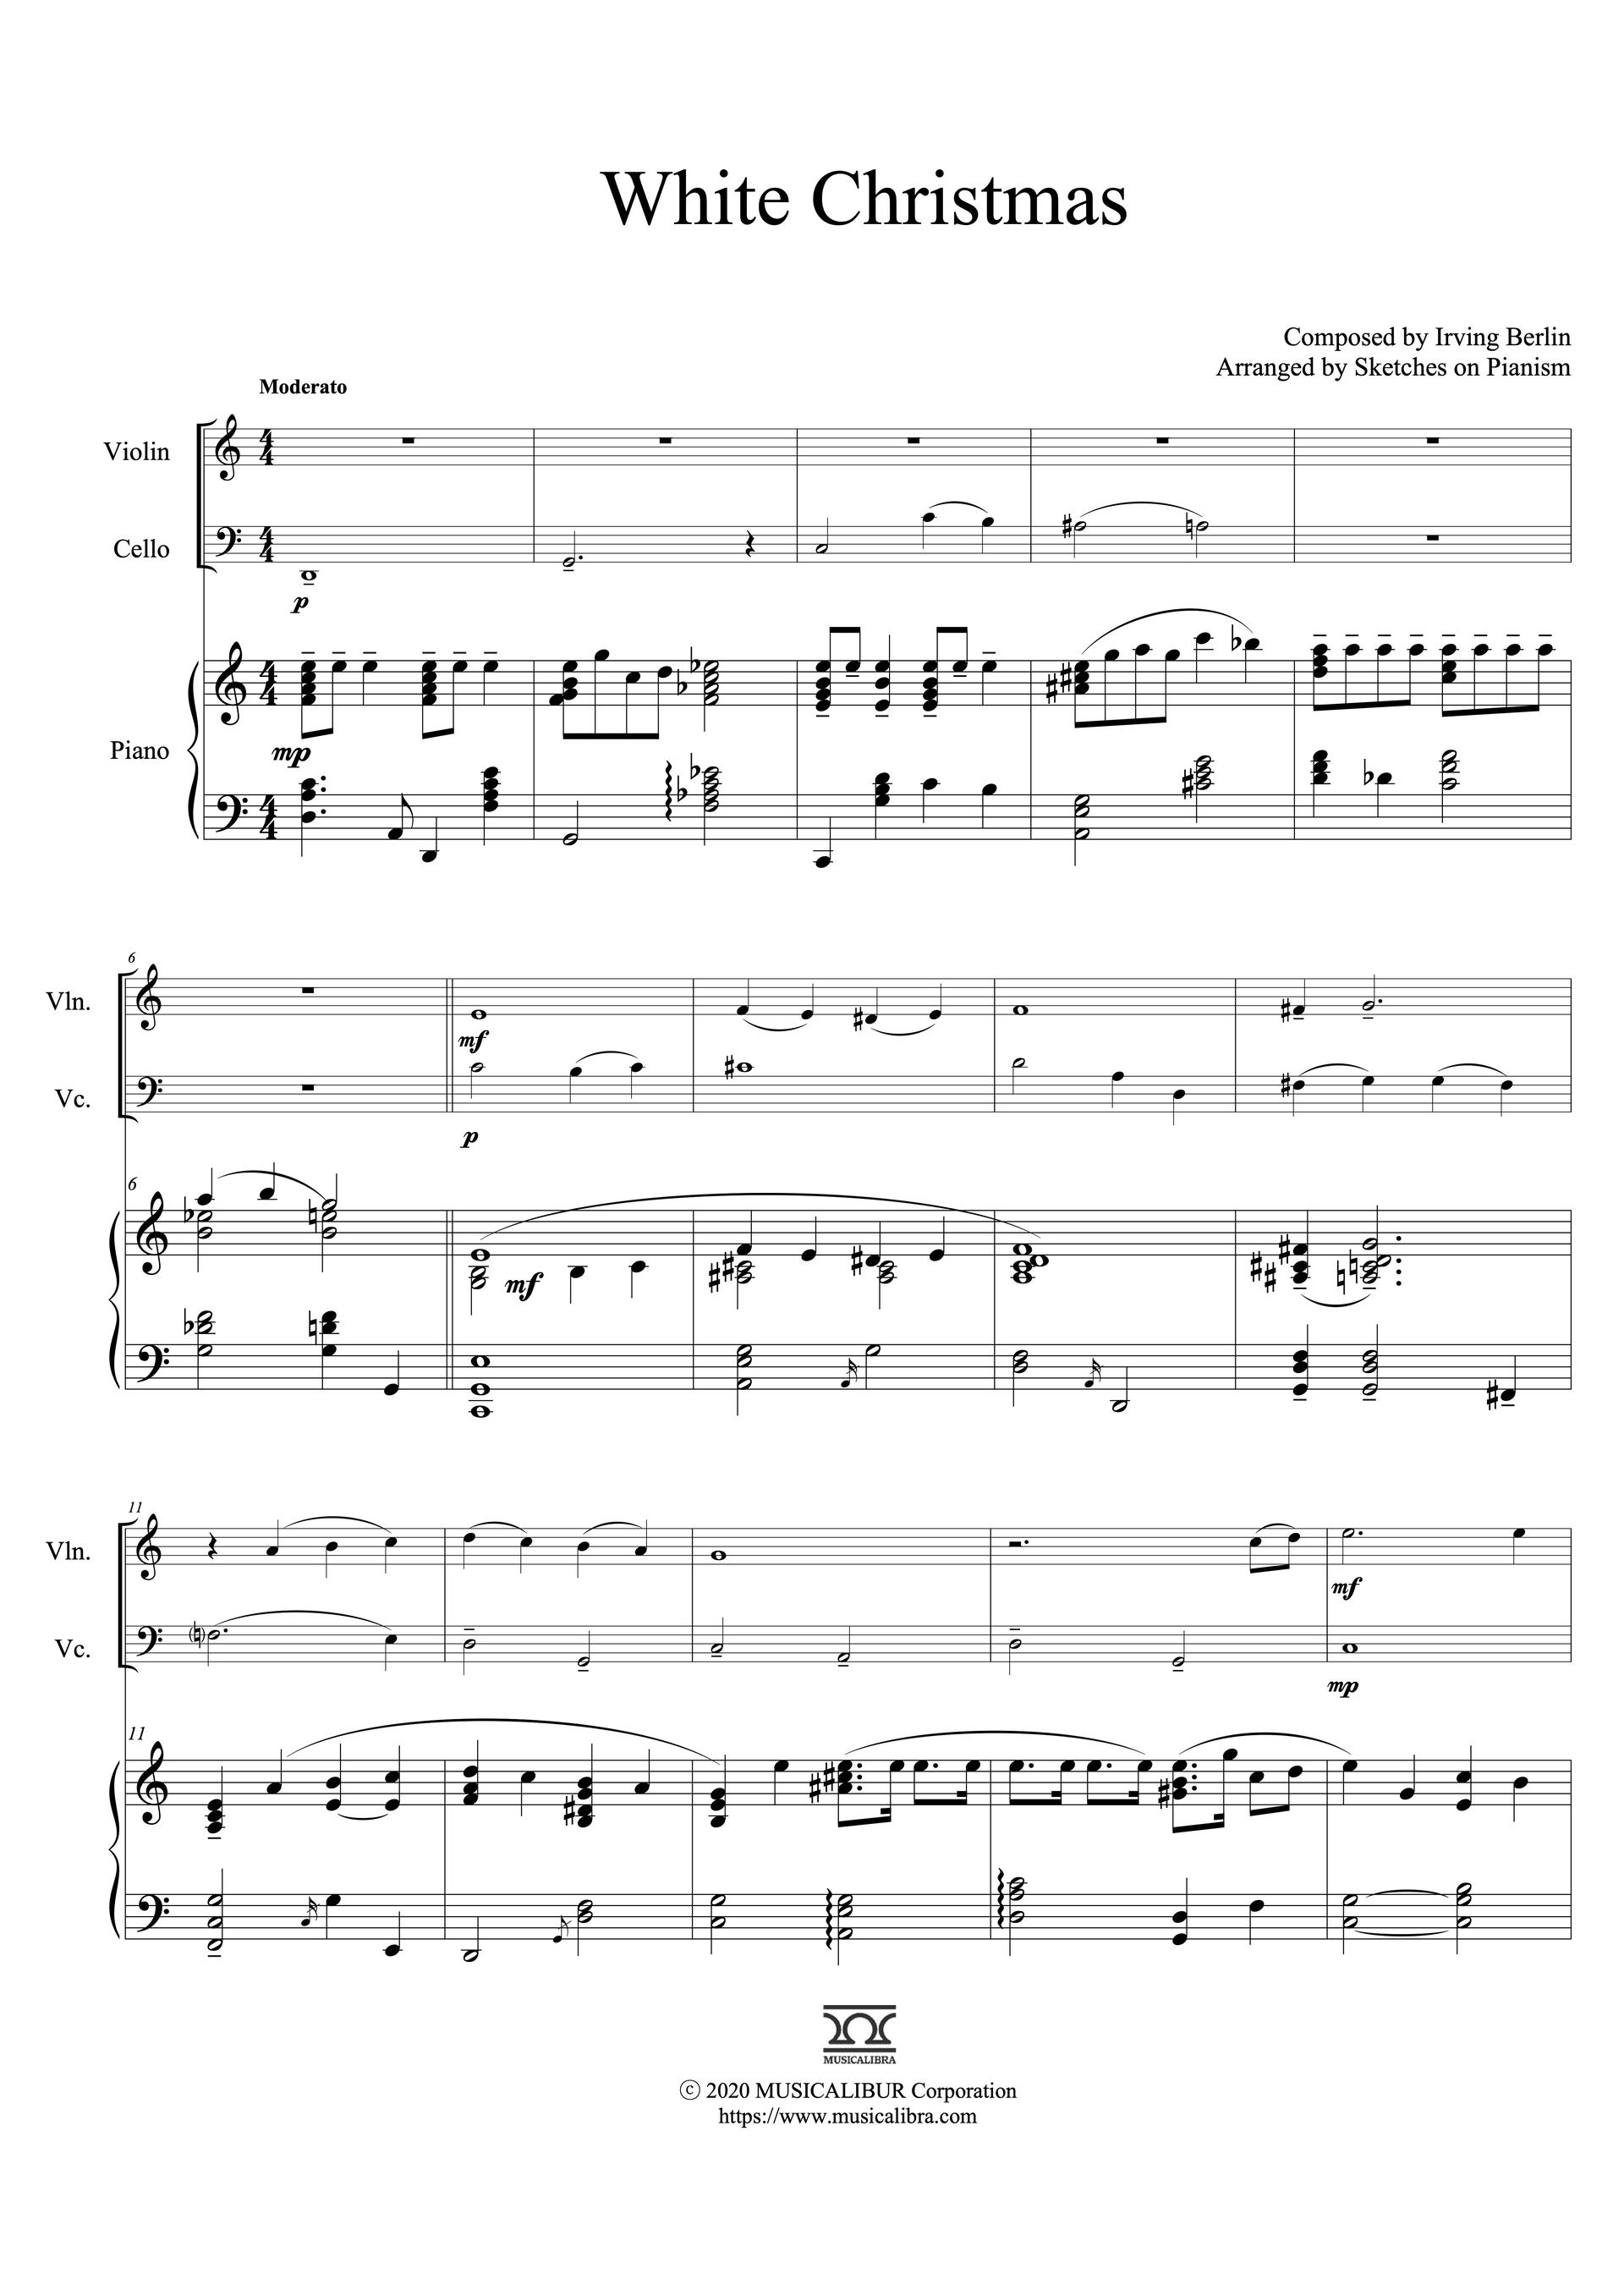 Sheet music of White Christmas arranged for violin, cello and piano trio preview page 1